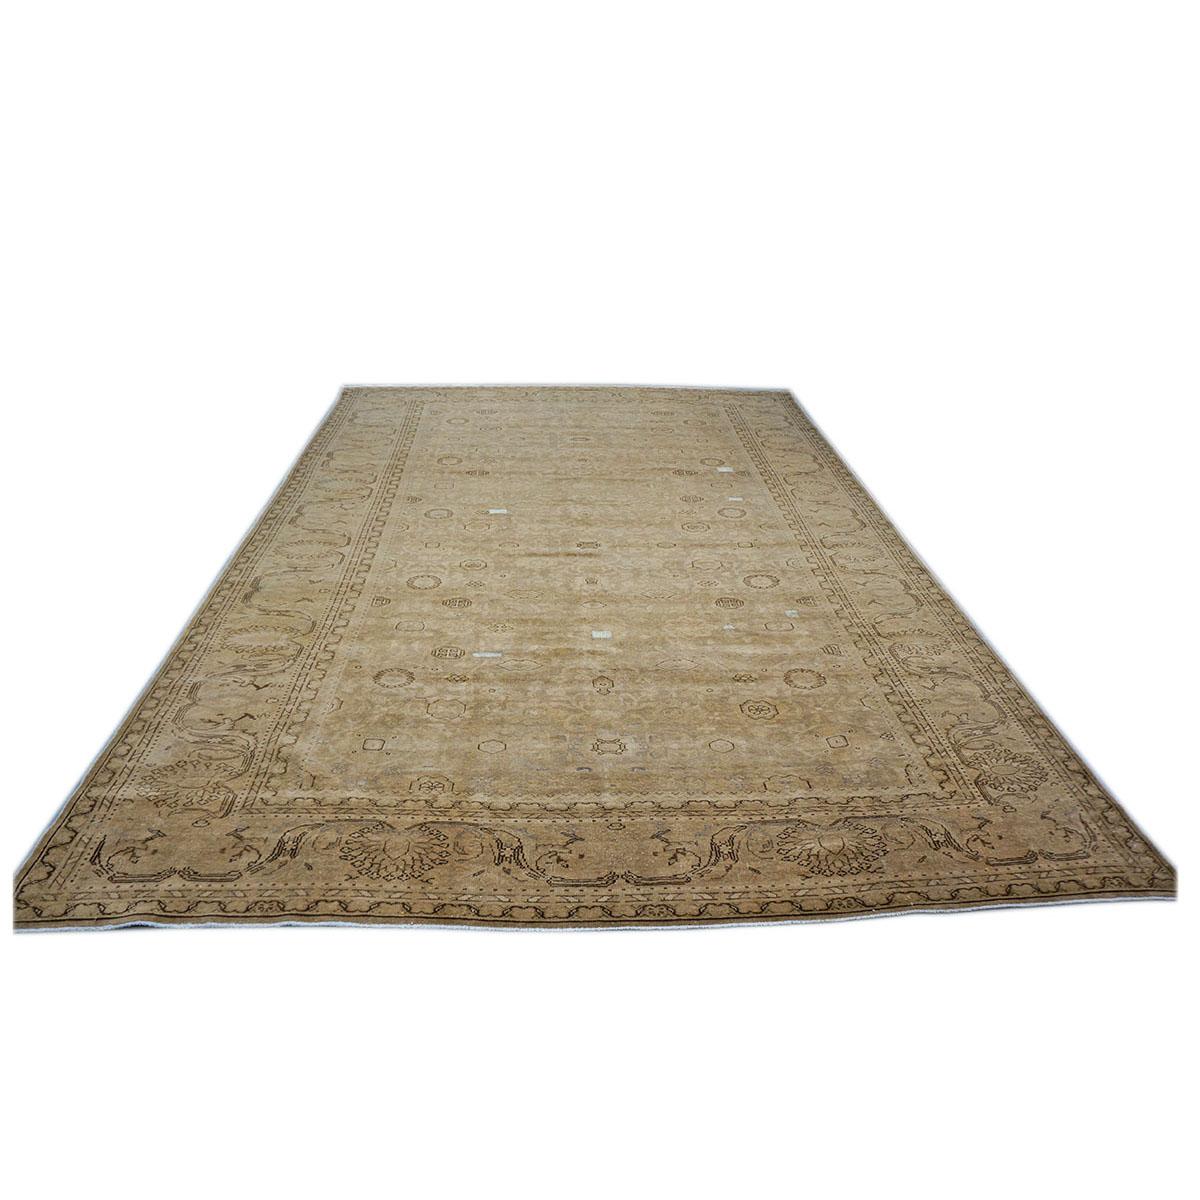 20th century hand-woven antique distressed Persian Malayer 9x12 wool living-room rug. Woven by weavers in Persia in the 1930s with hand-spun wool and sun-washed by our expert colorist. This piece consists of an all-over brown colored background